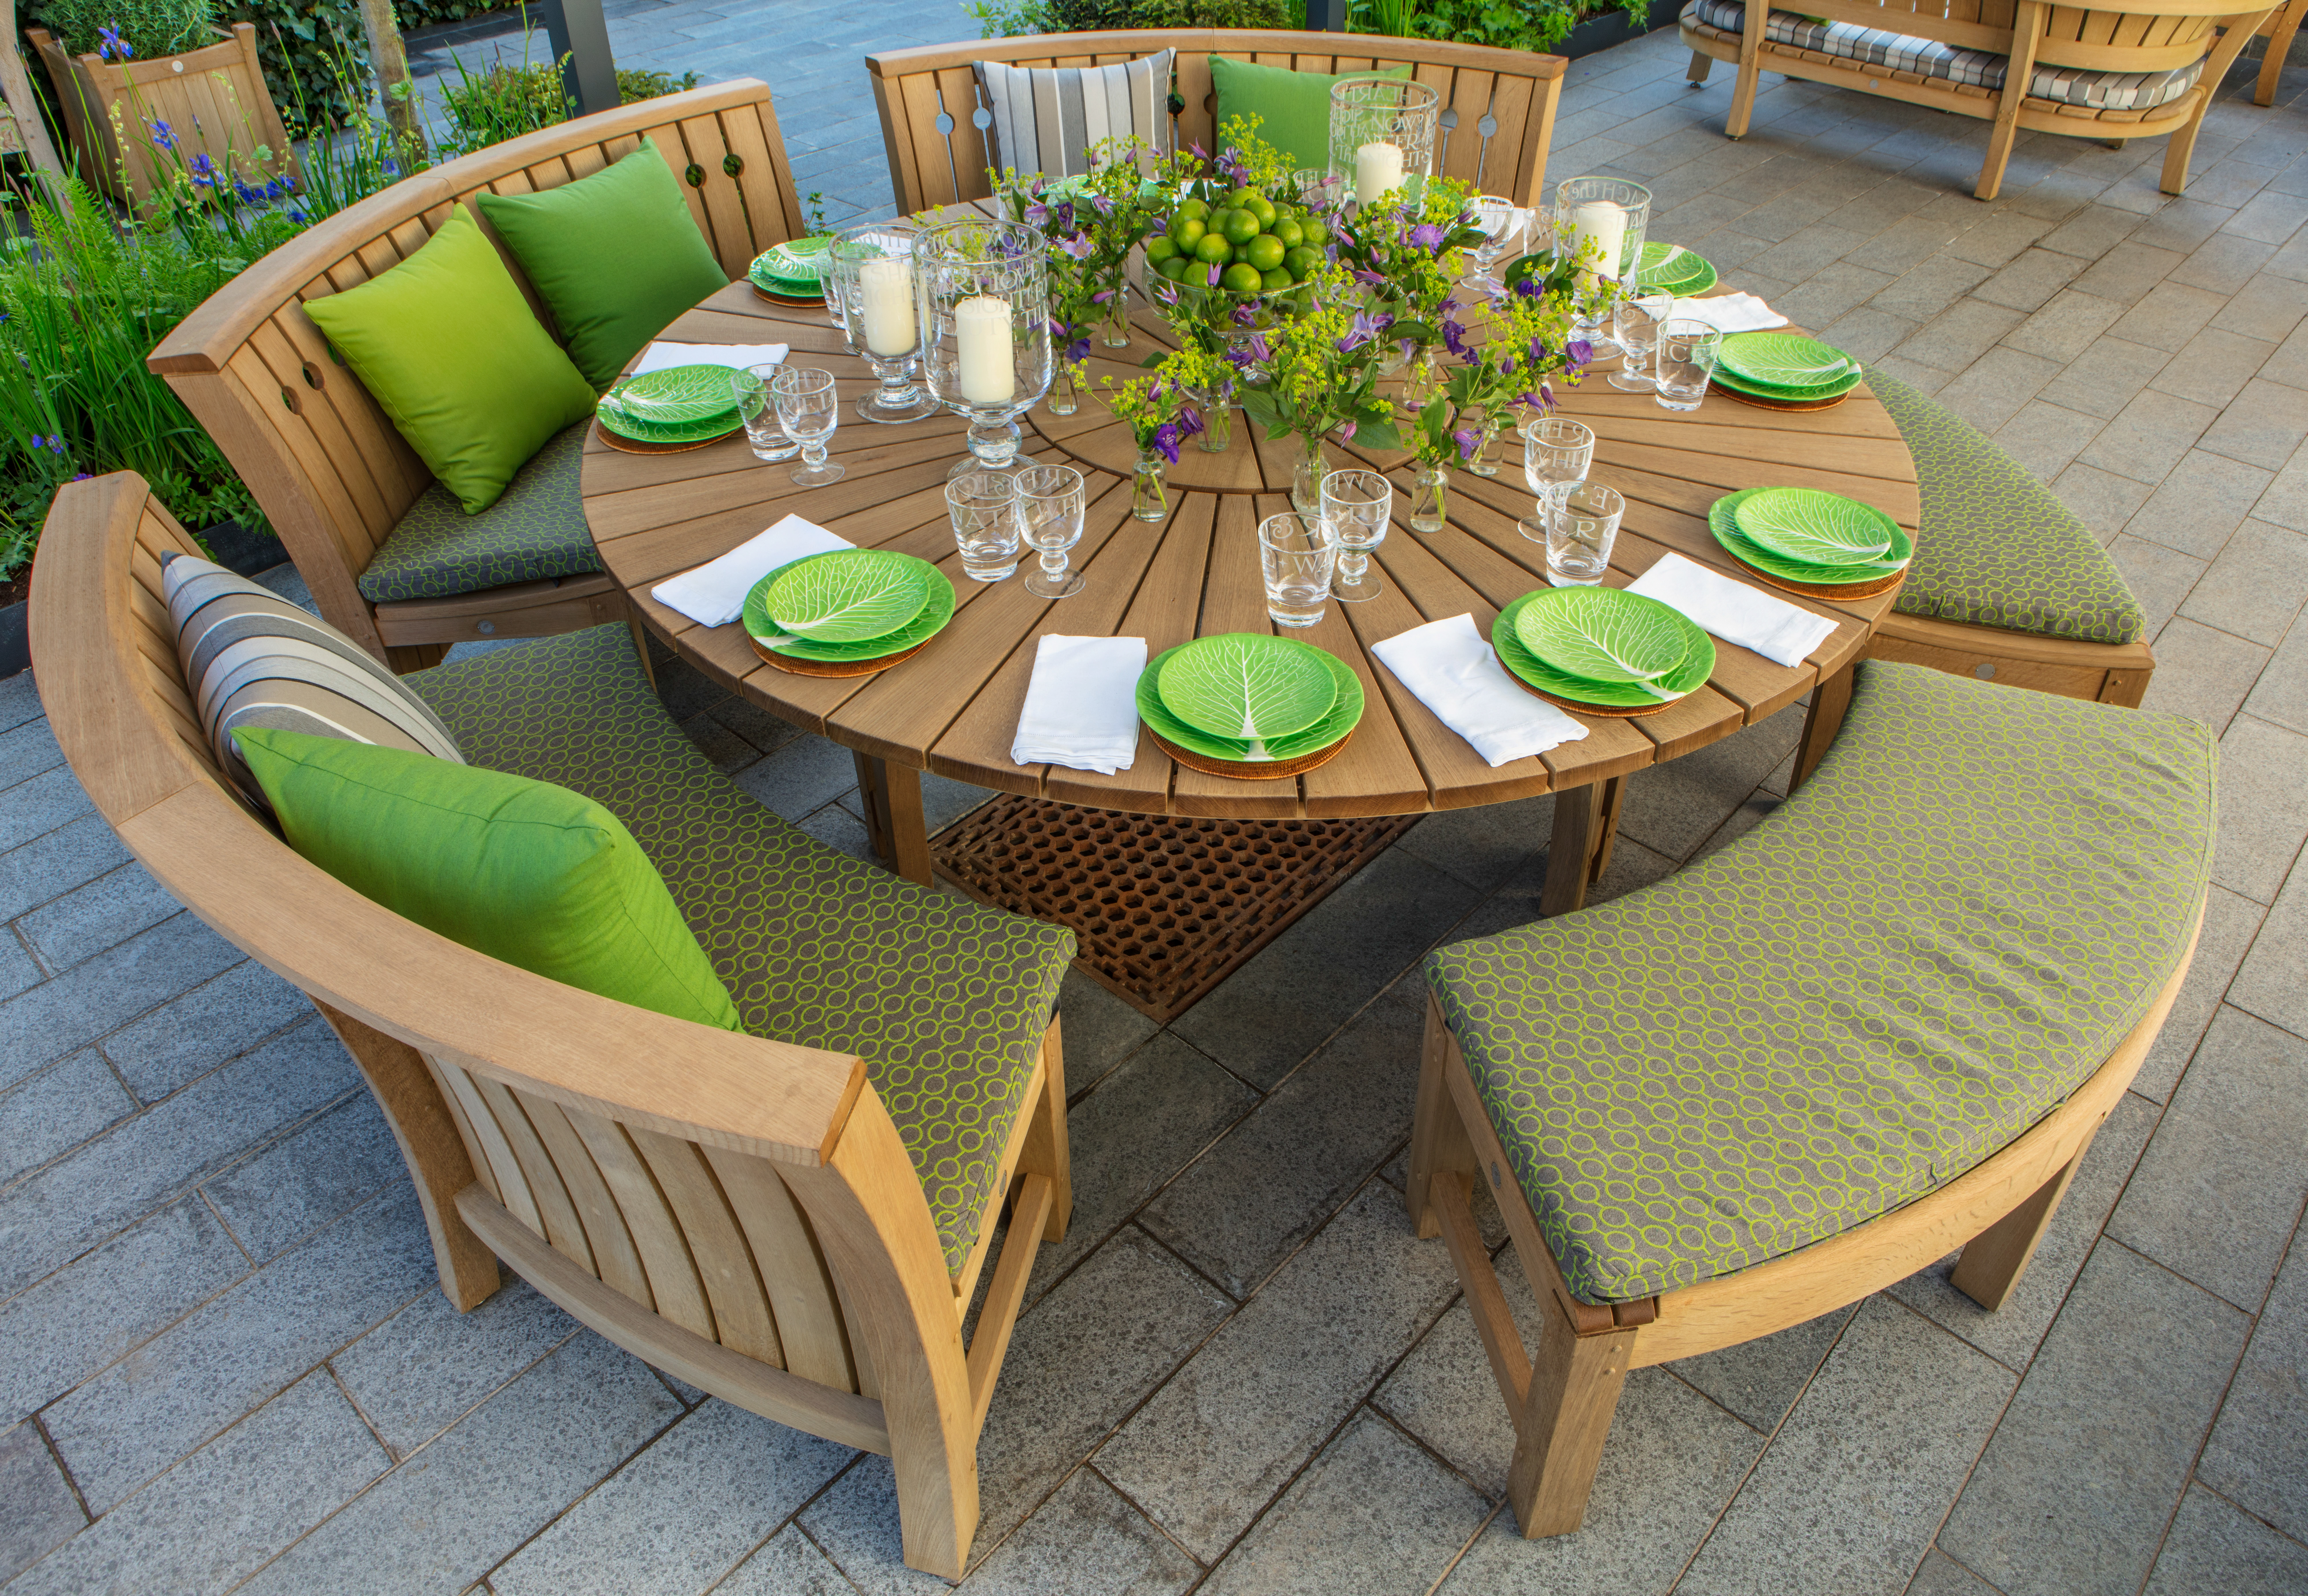 Gaze Burvill outdoor dining, Broadwalk round table and benches